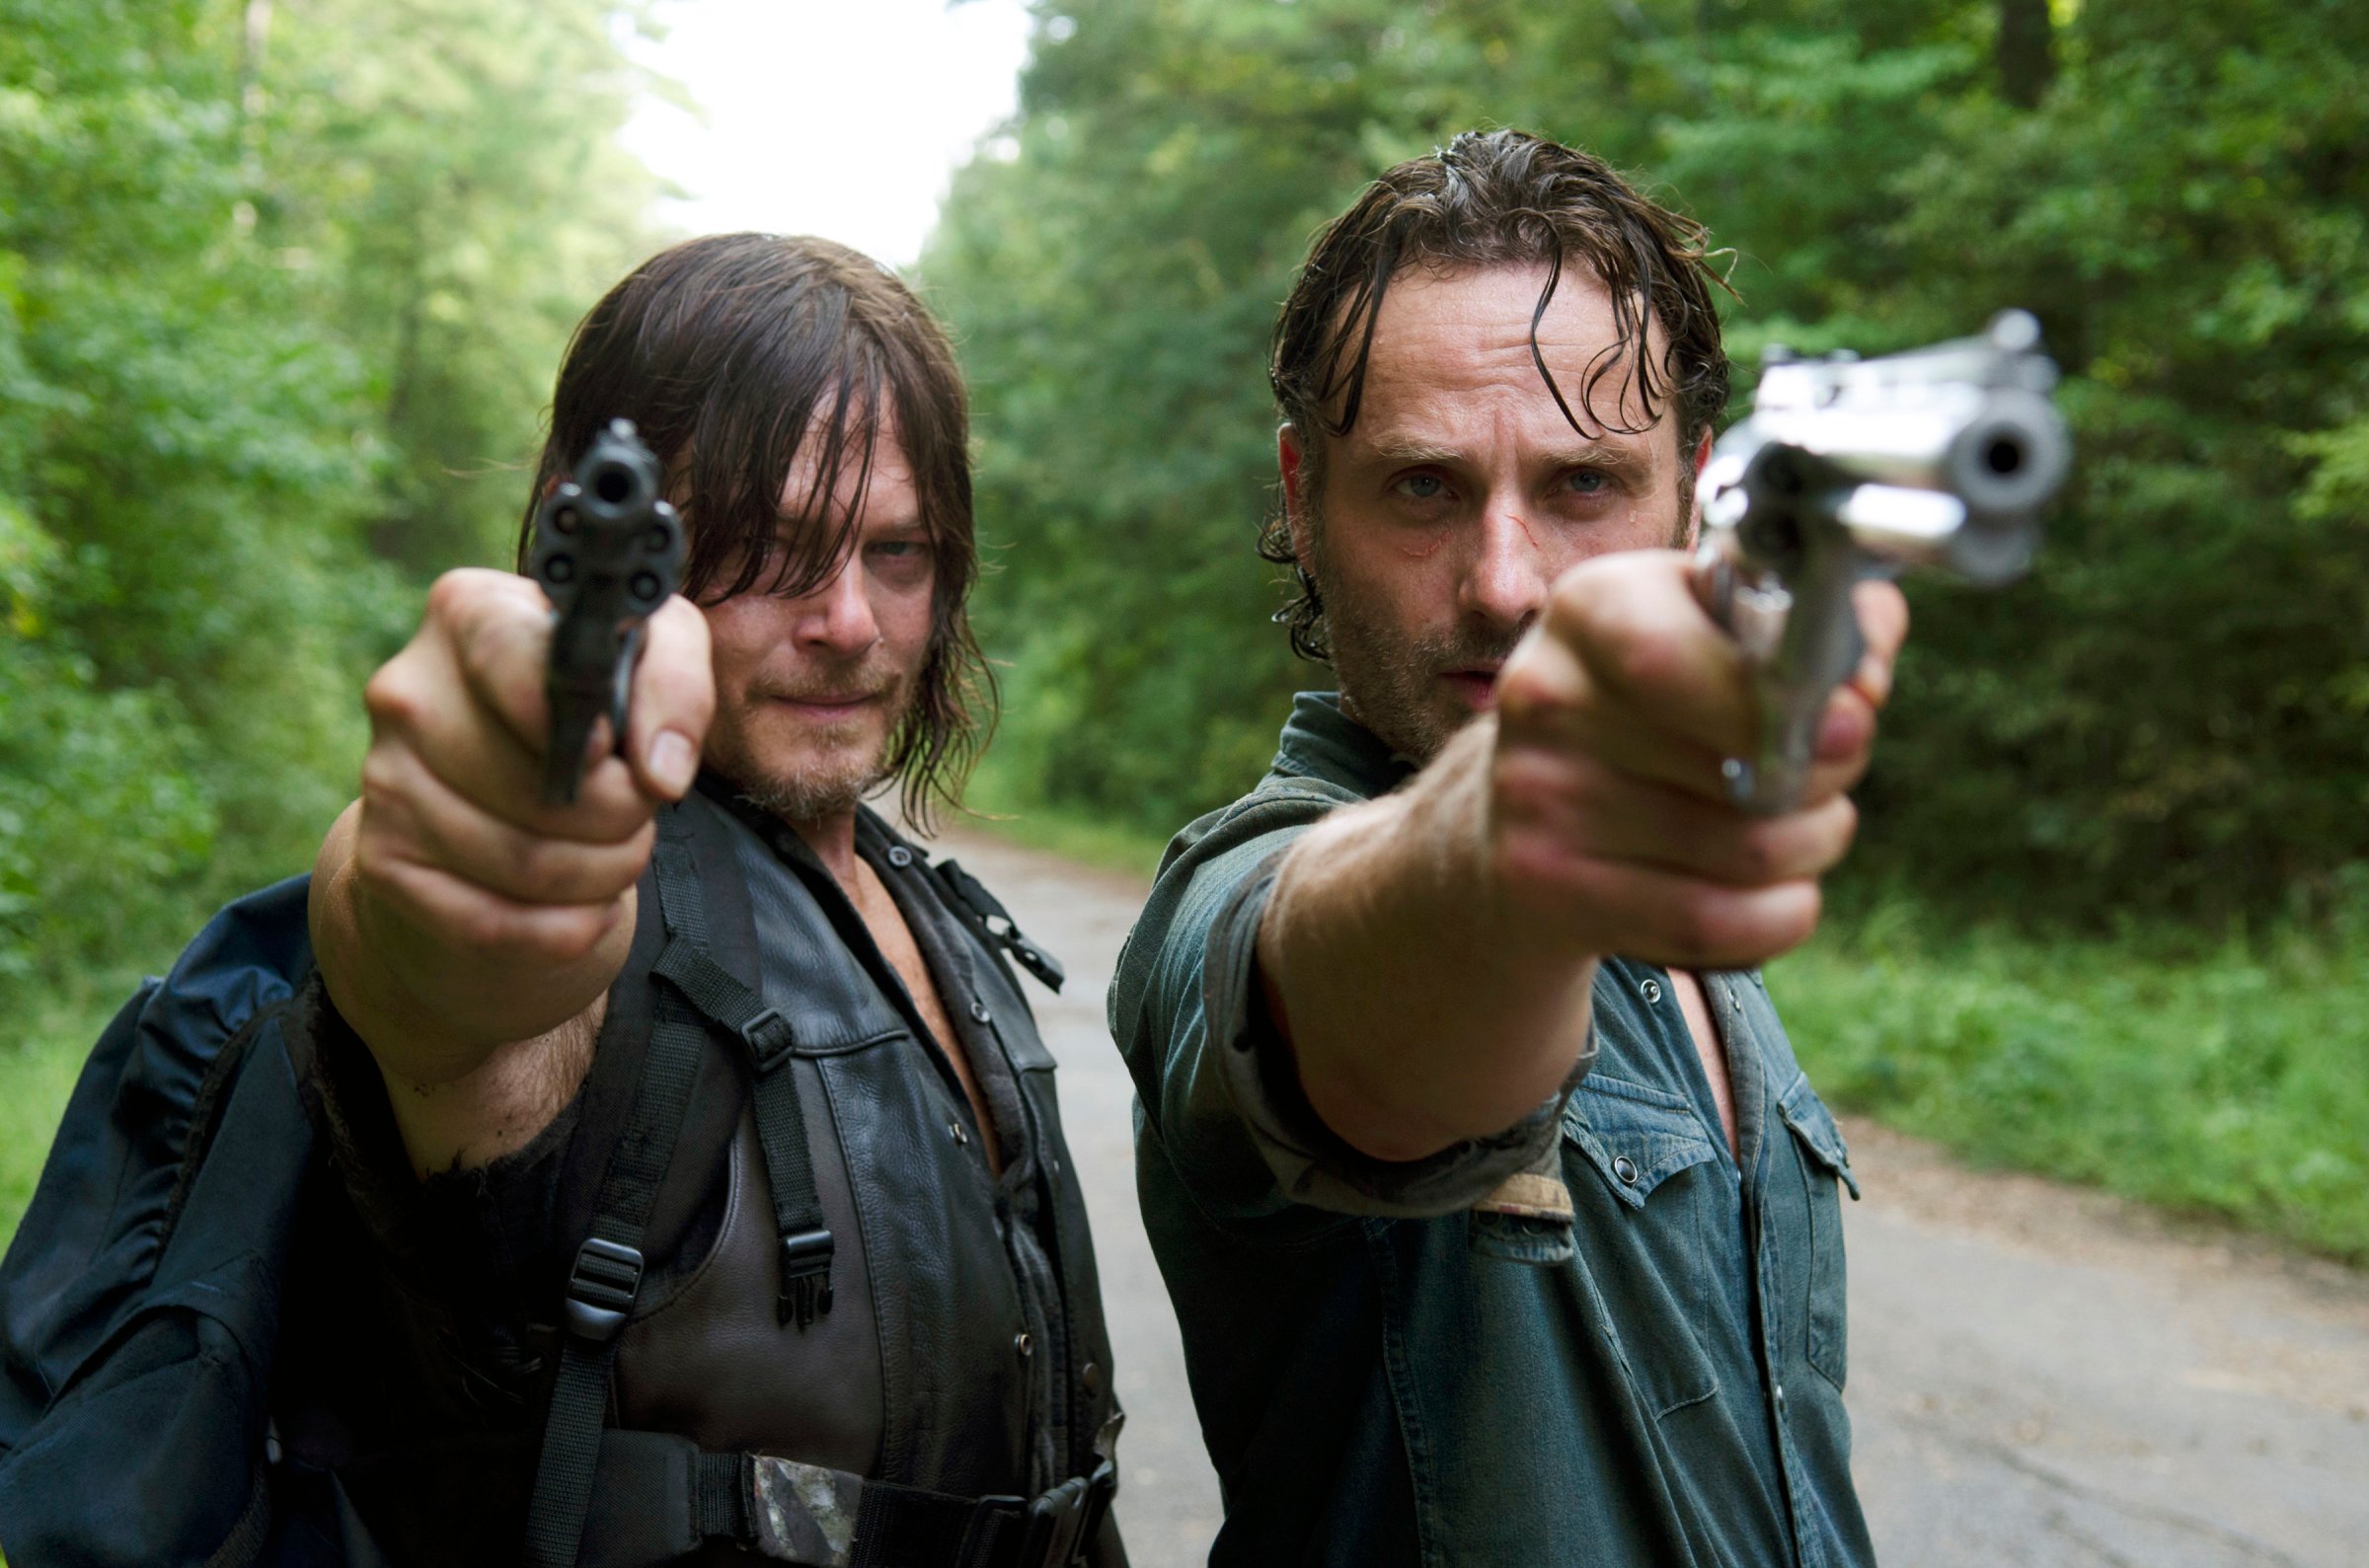 From left: Norman Reedus, as Daryl Dixon, and Andrew Lincoln, as Rick Grimes, in The Walking Dead.